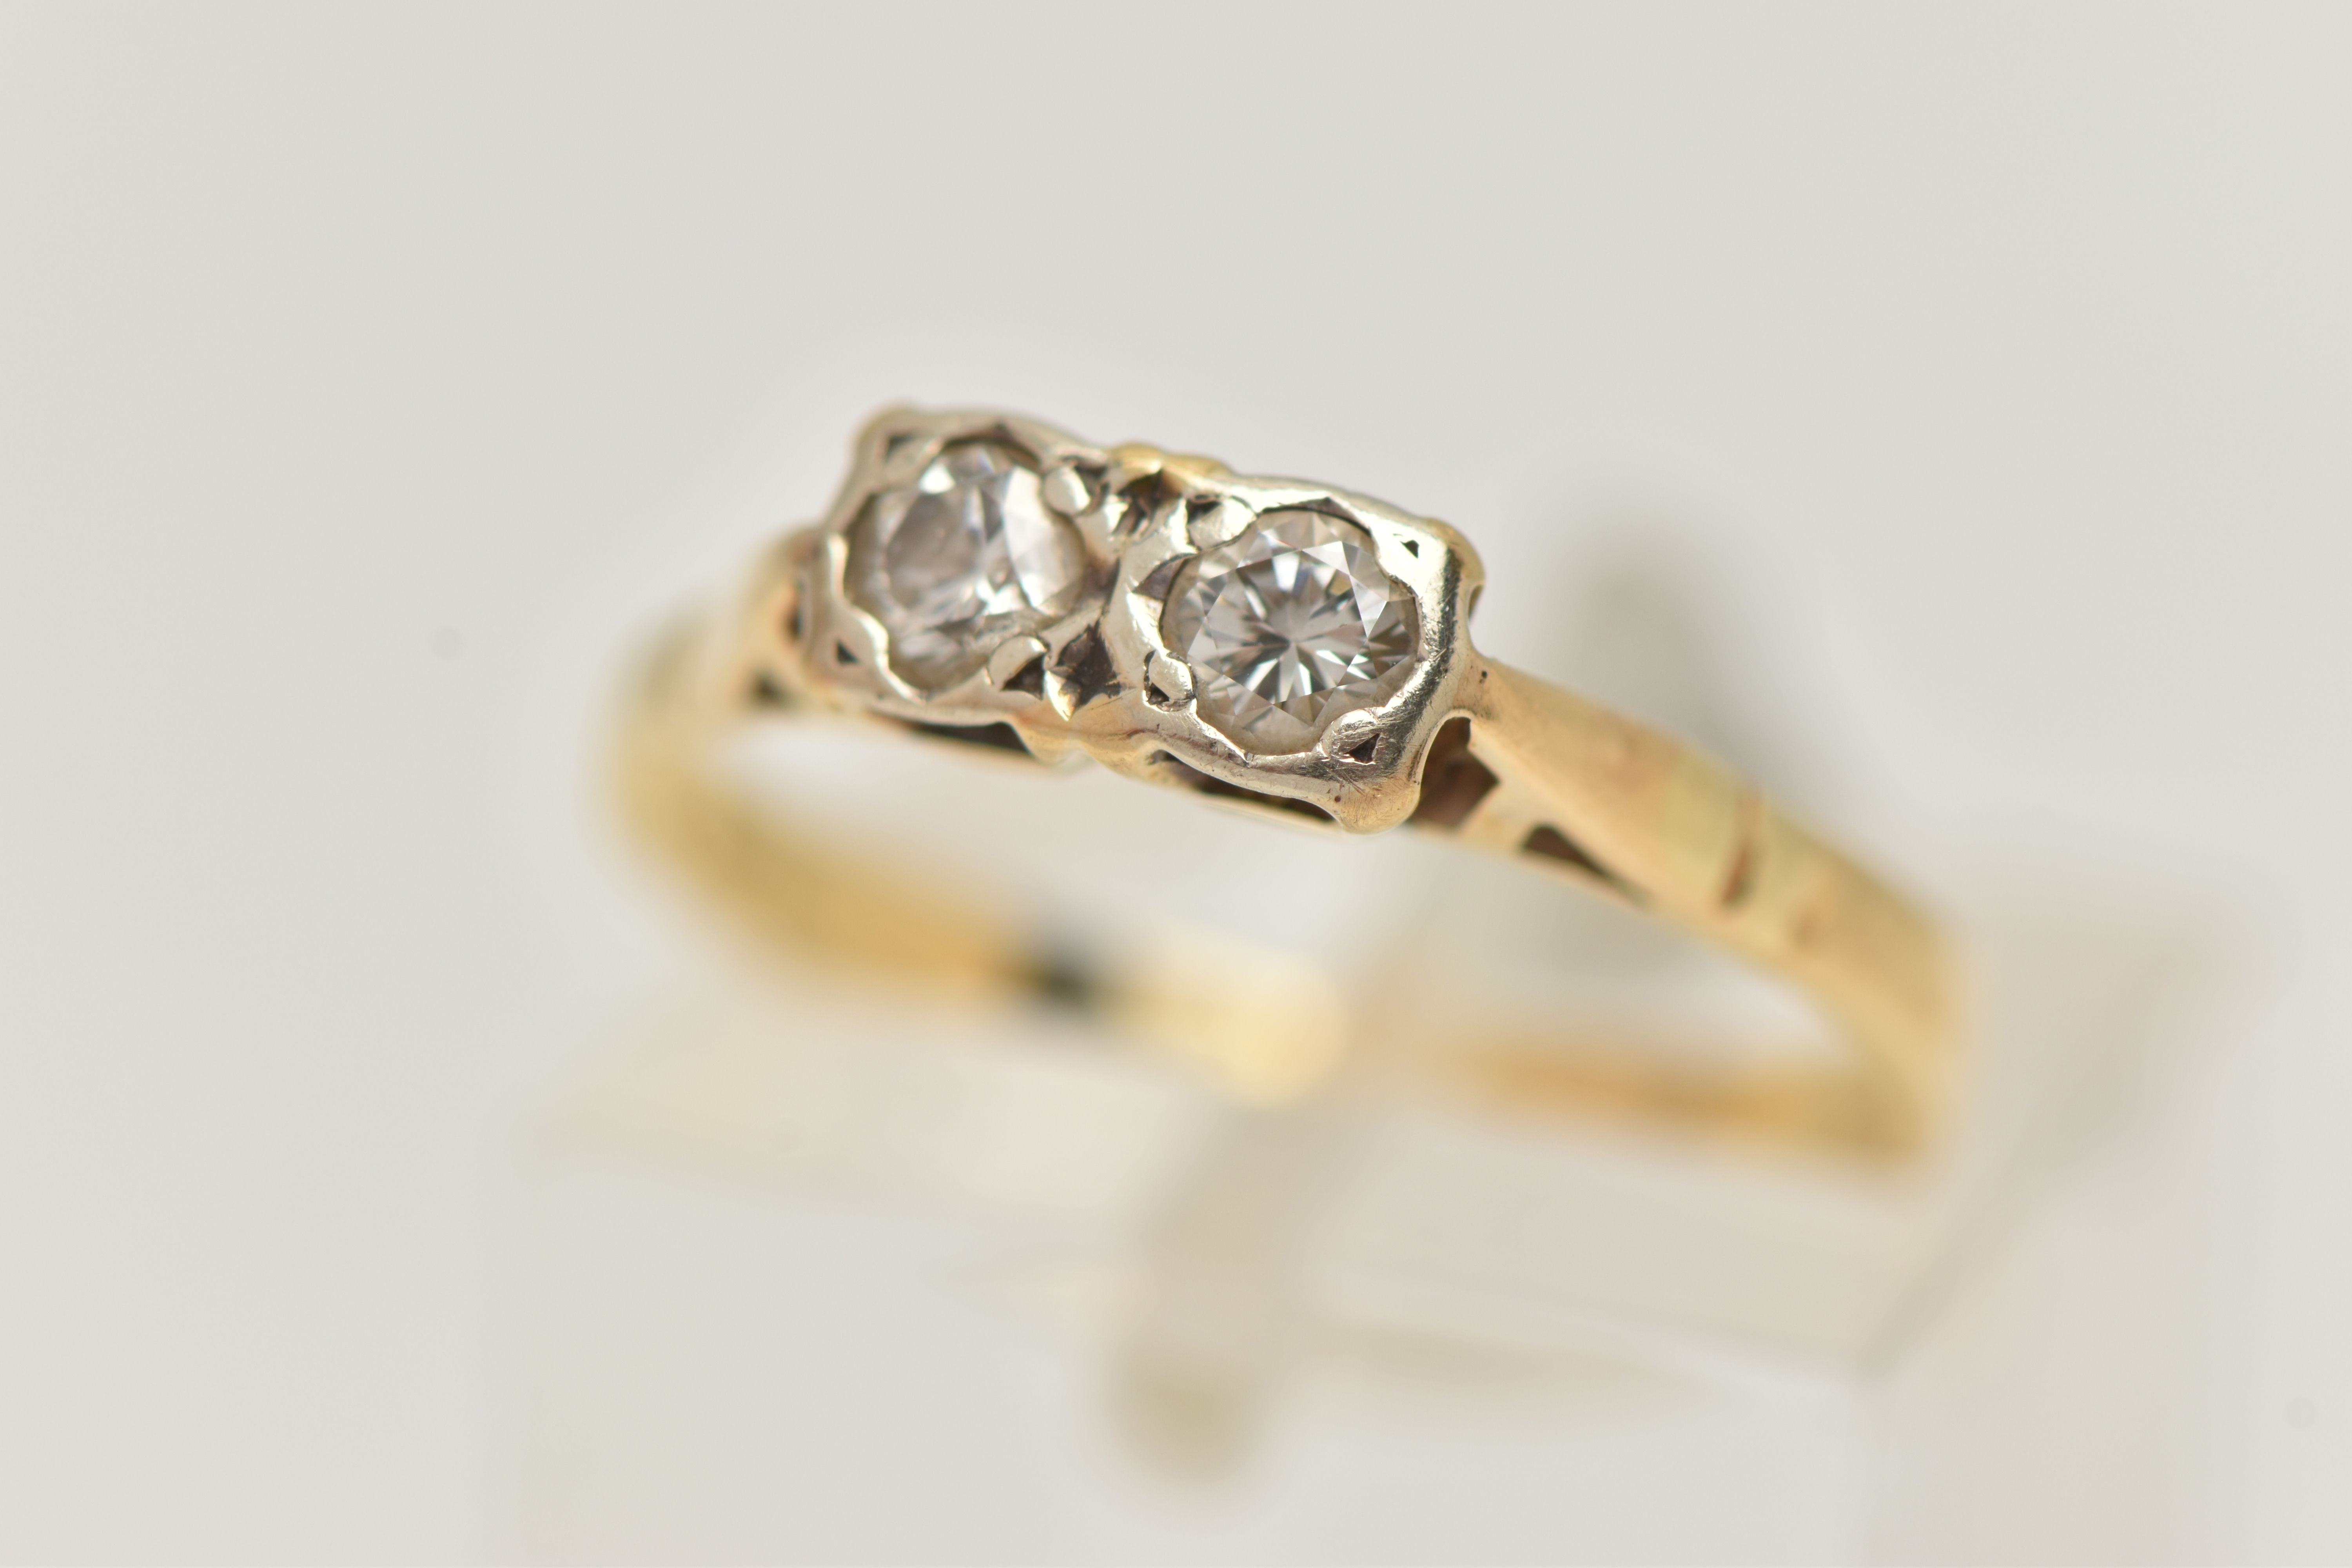 A DIAMOND TWO STONE RING, set with round brilliant cut diamonds, each measuring approximately 3.